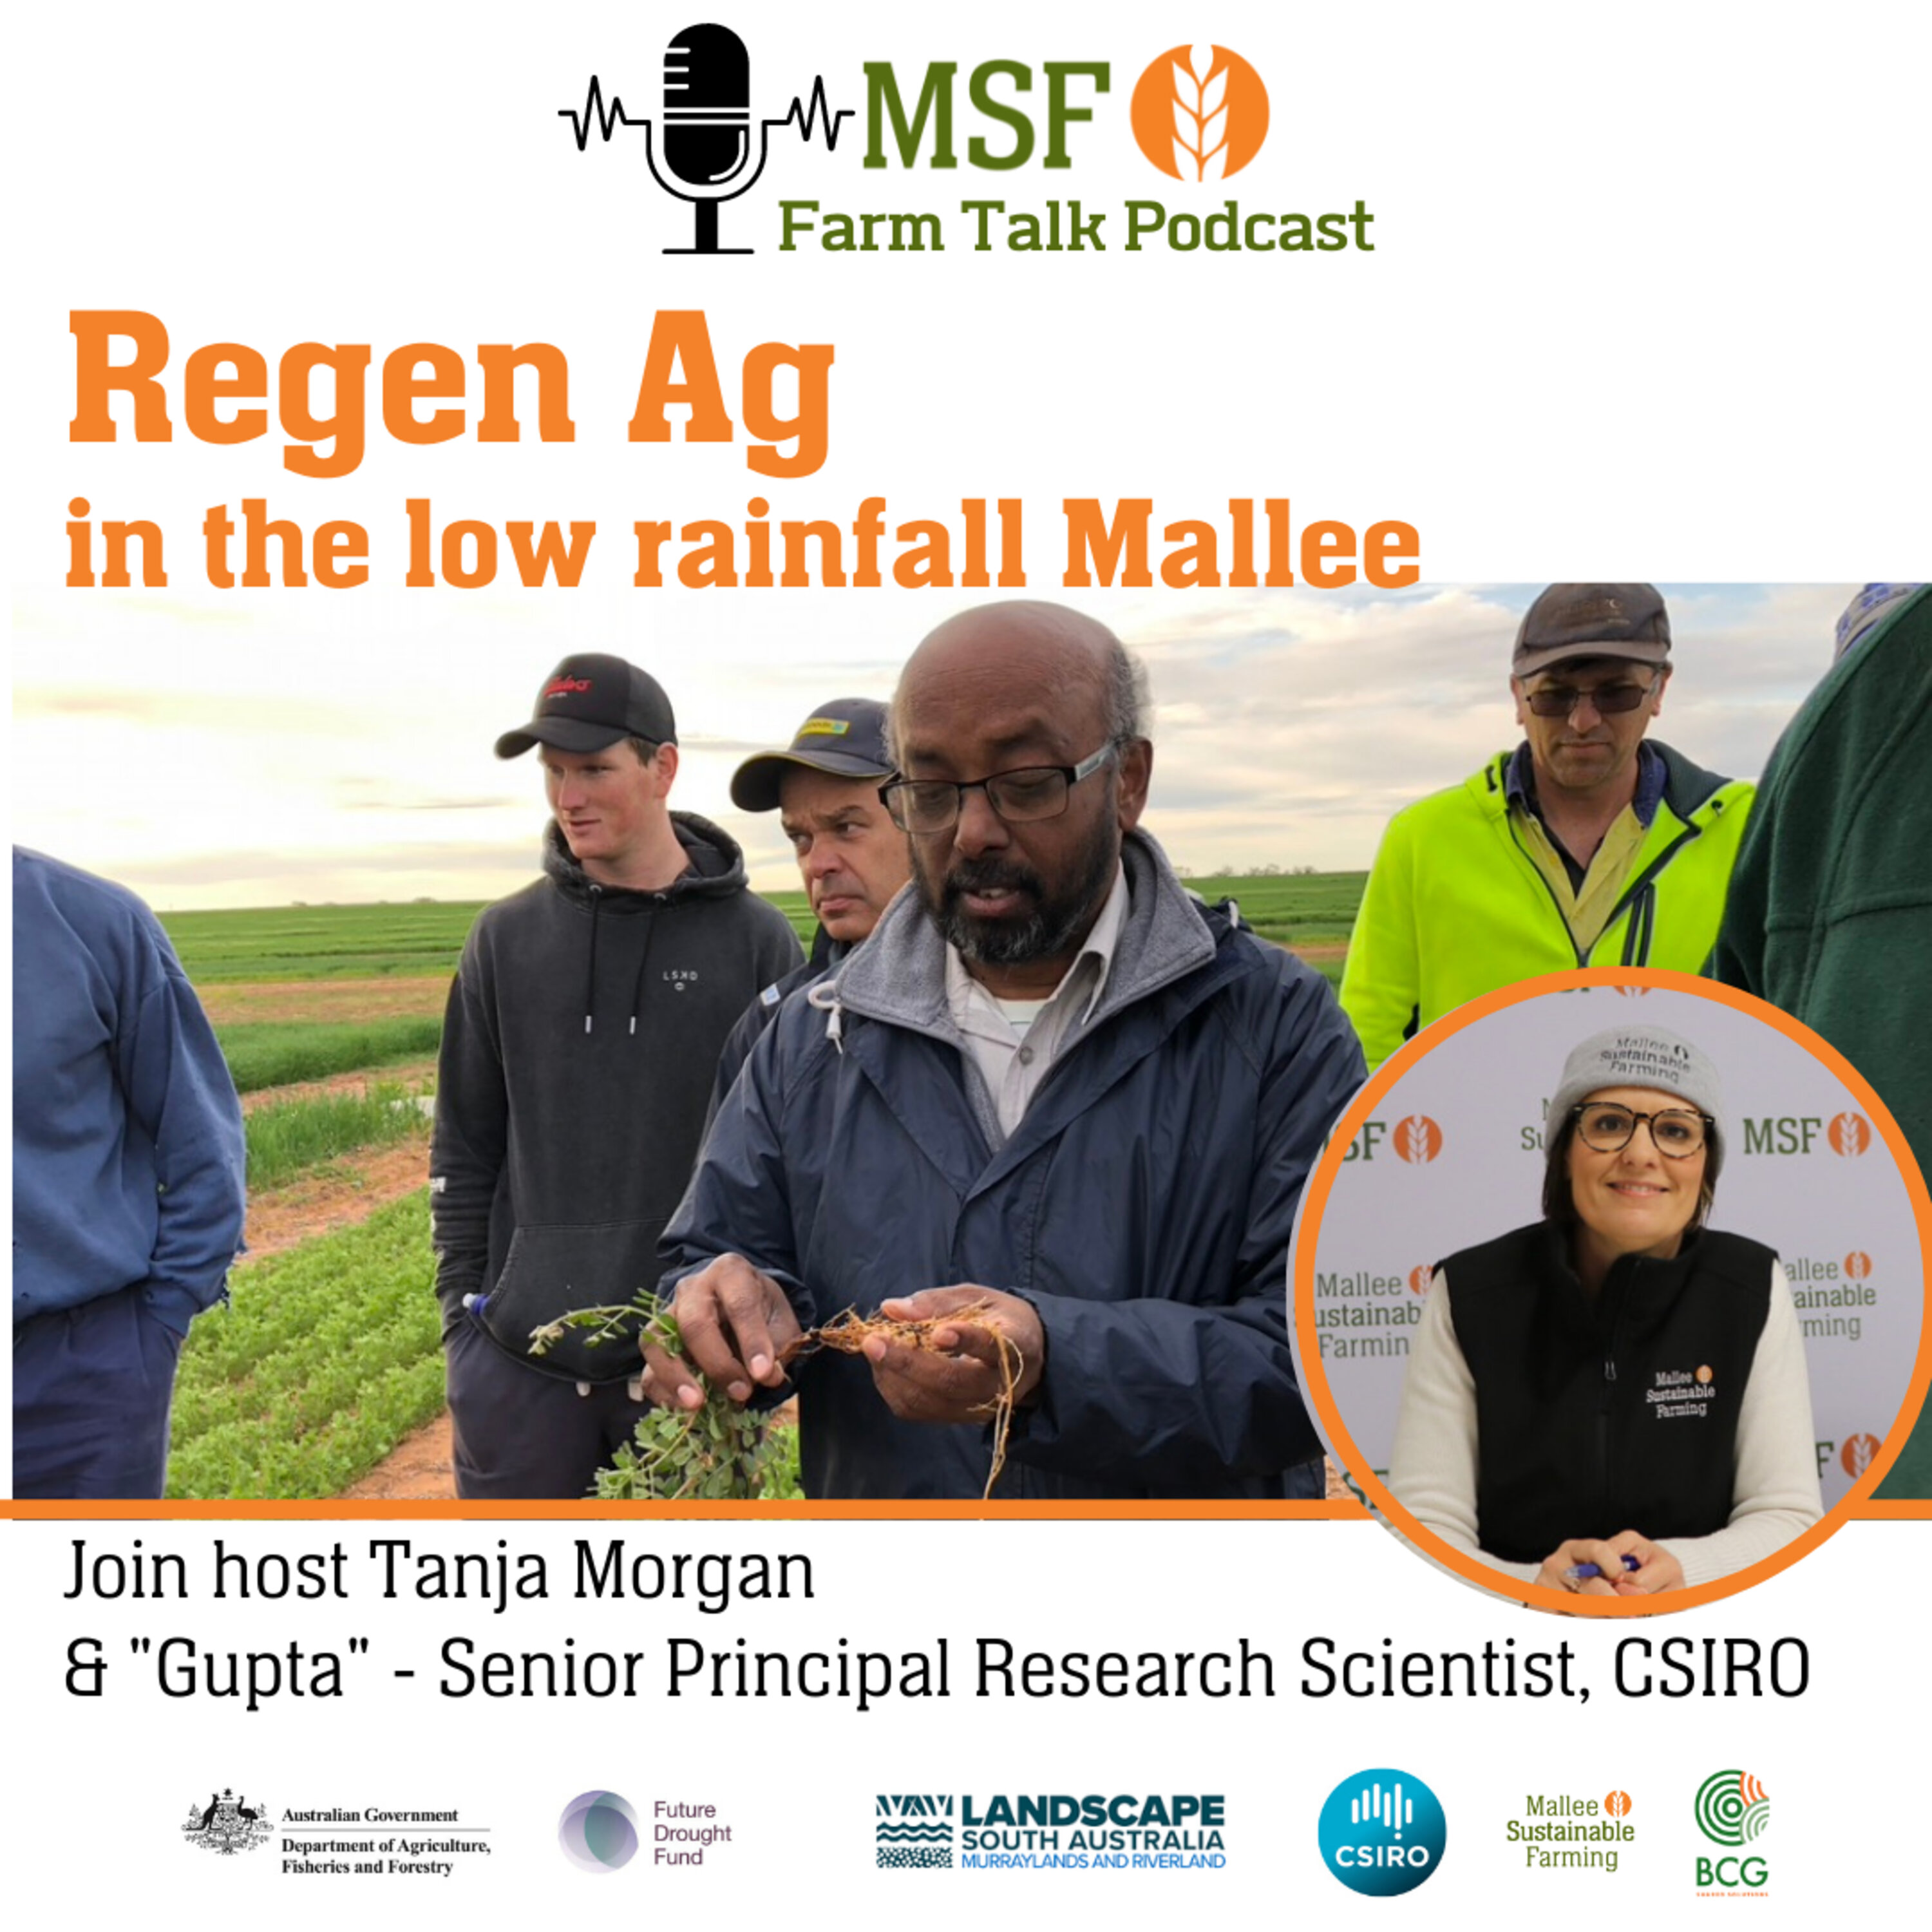 Regen Ag in the low rainfall Mallee with Gupta